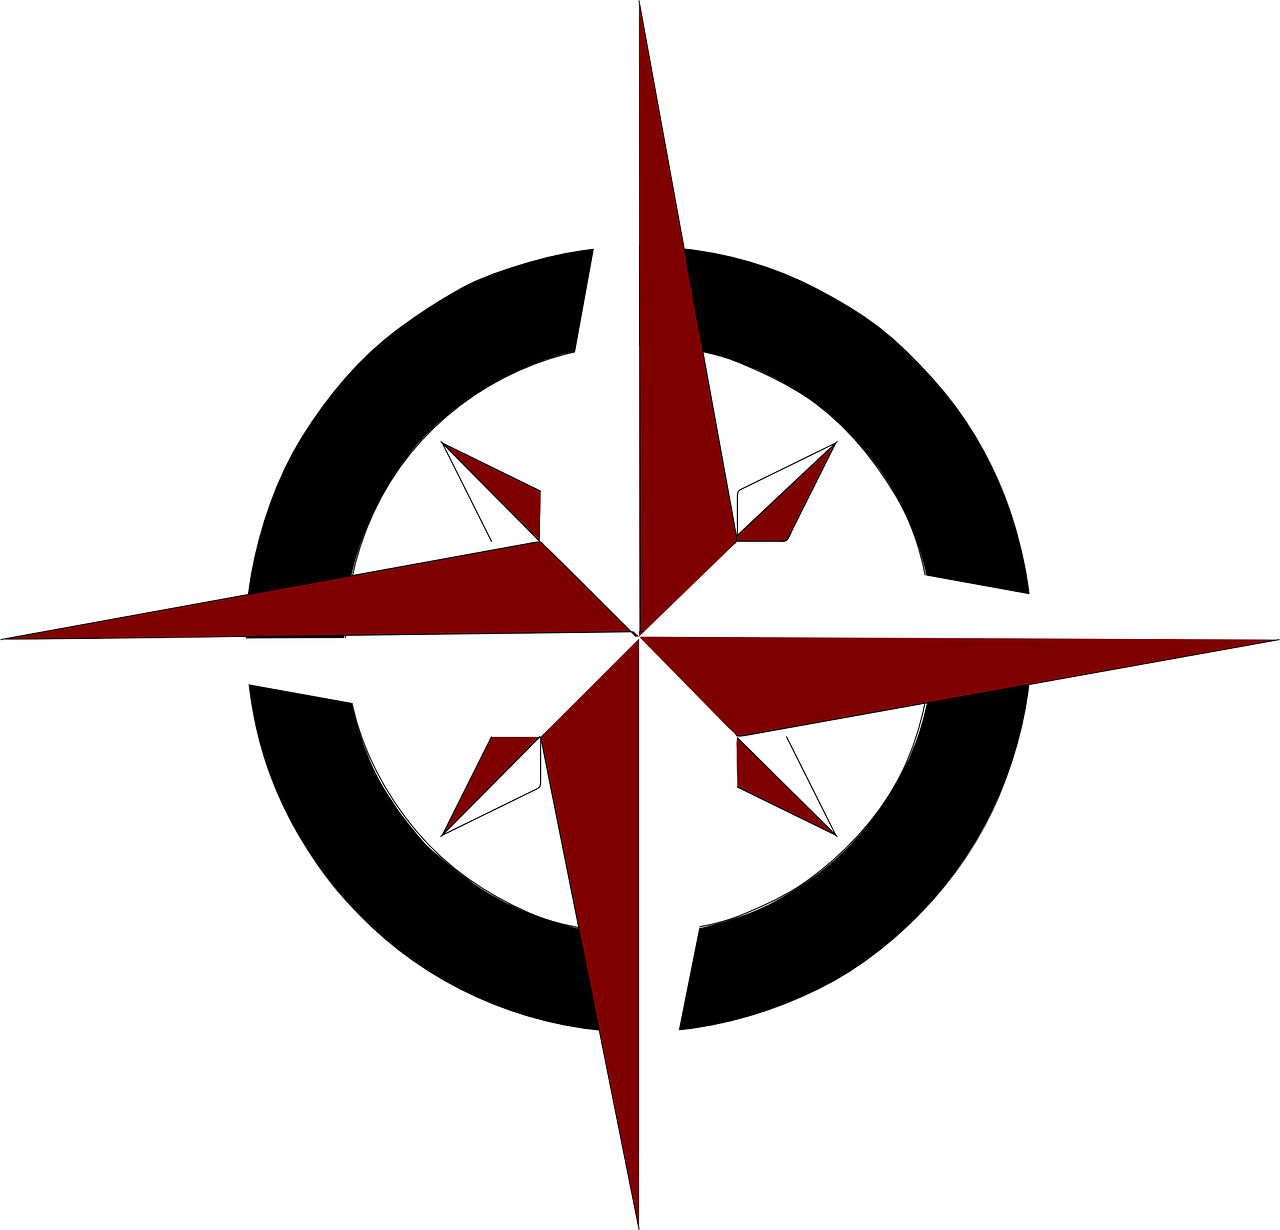 Compass Rose South North East West Free Image From Needpix Com